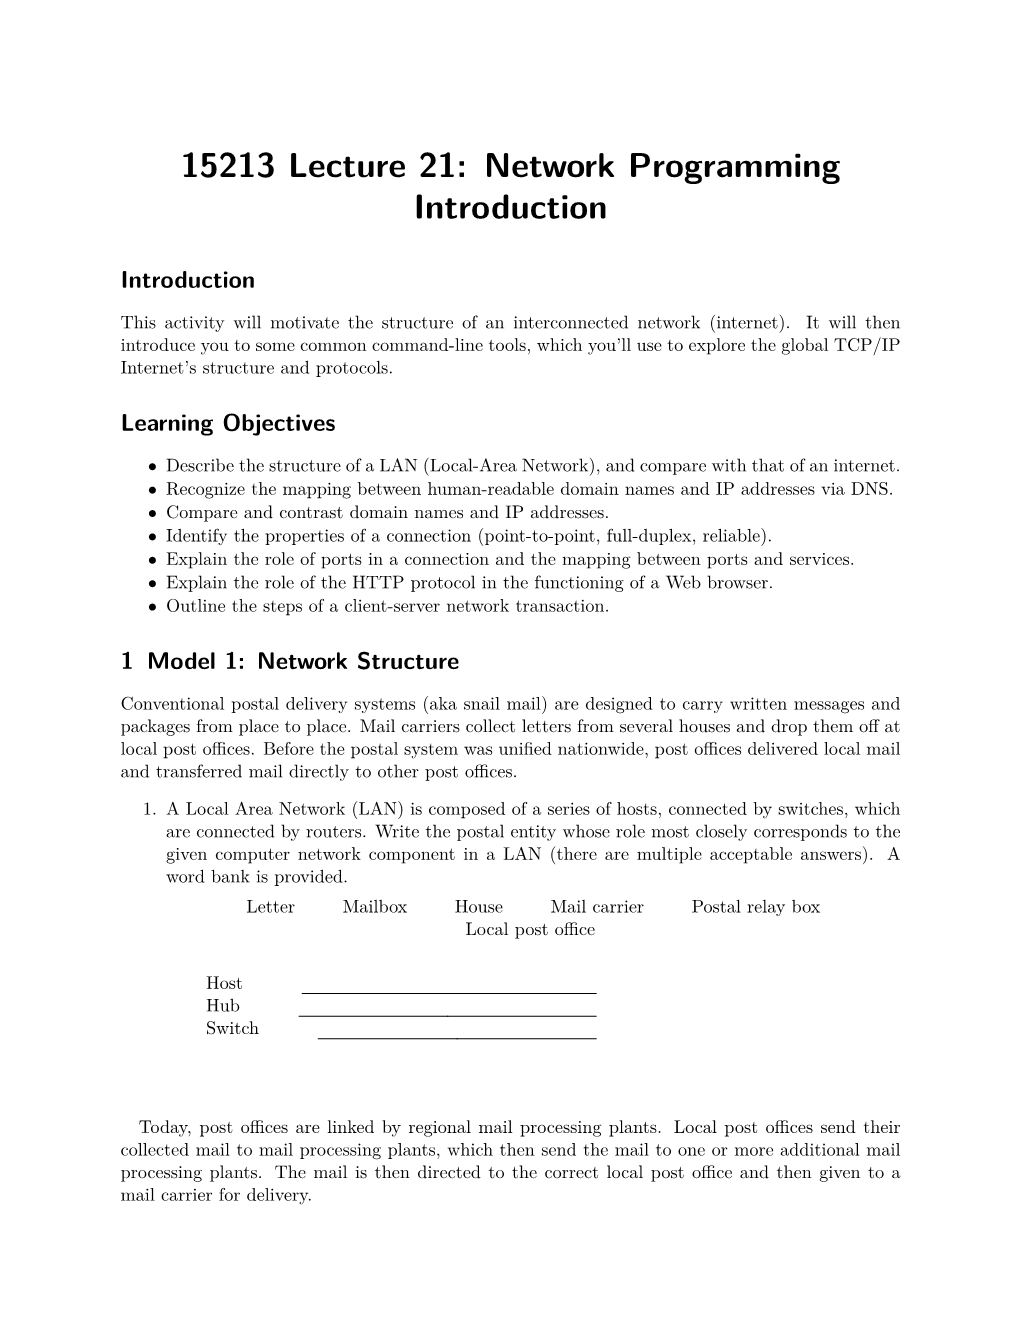 15213 Lecture 21: Network Programming Introduction